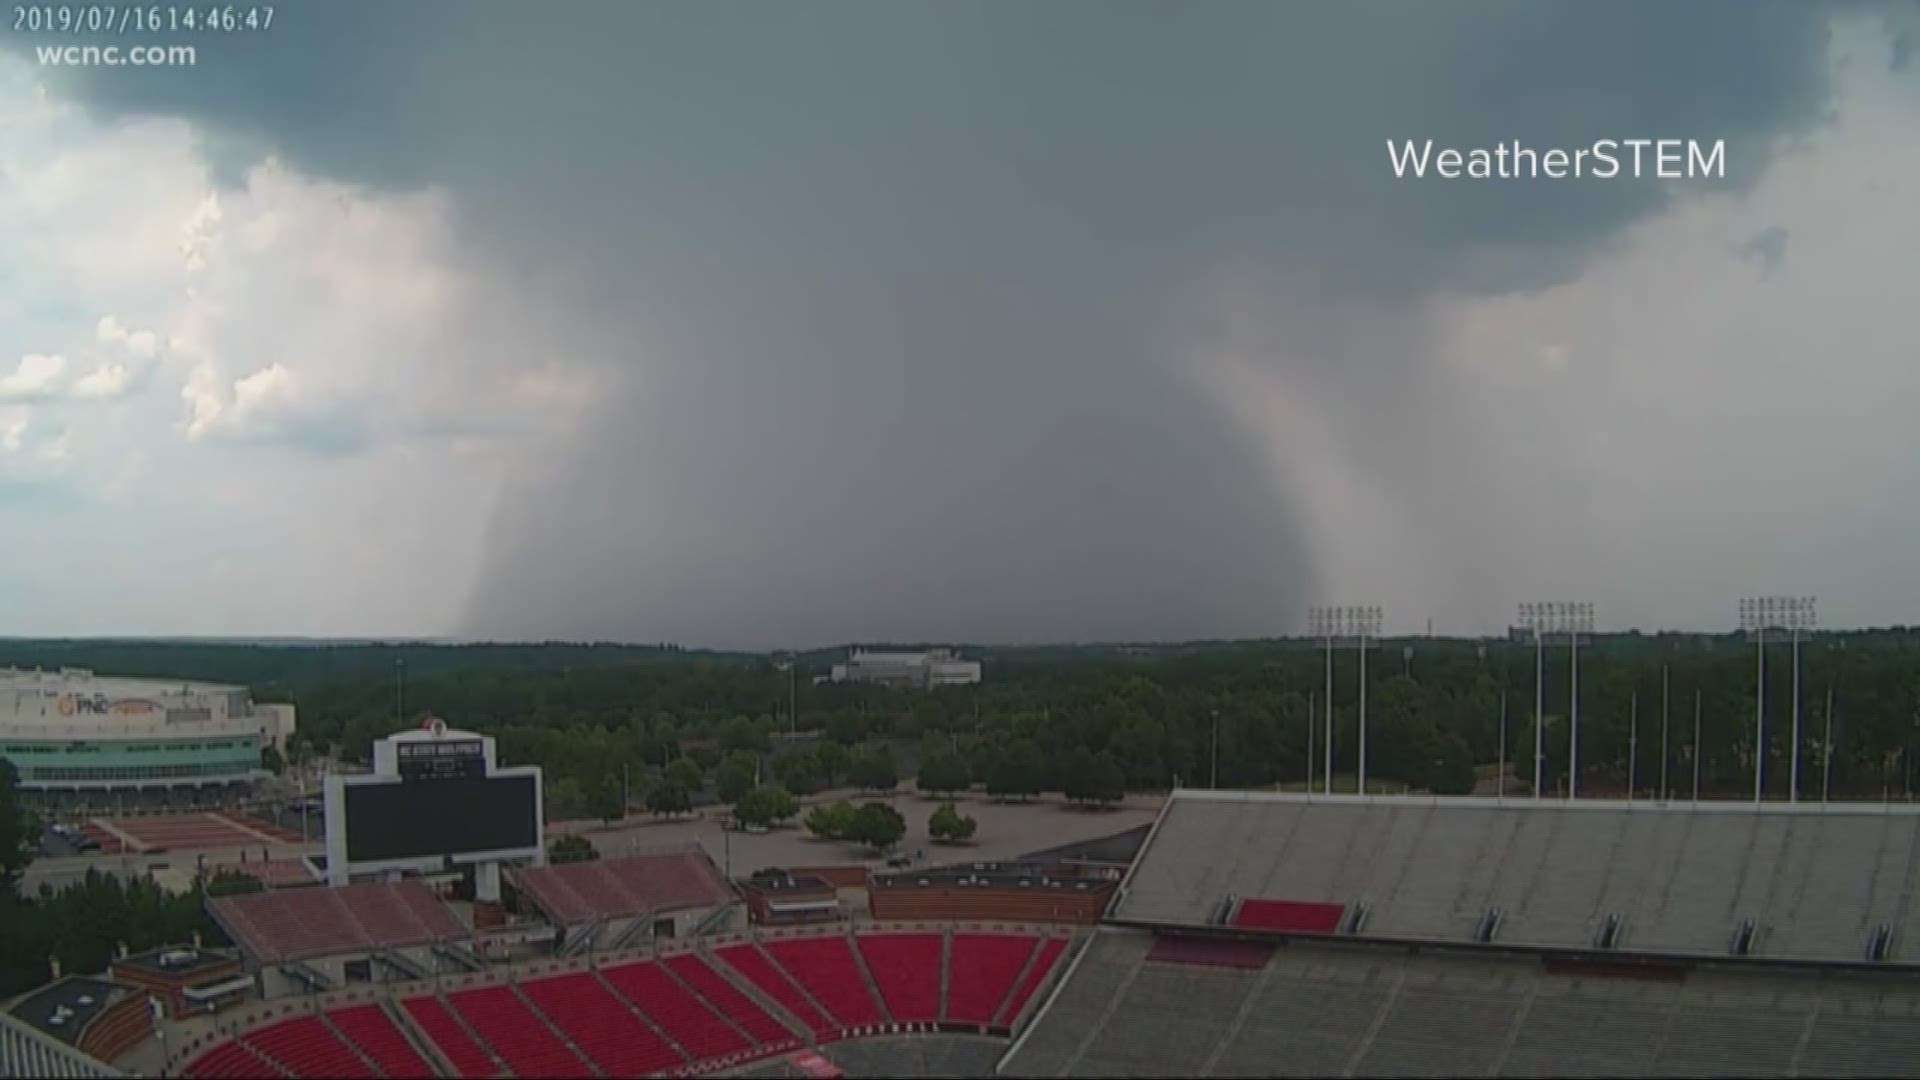 A thunderstorm near Raleigh produced a wet microburst, which is an intense column of air rushing towards the surface. It knocked down several trees near NC State.